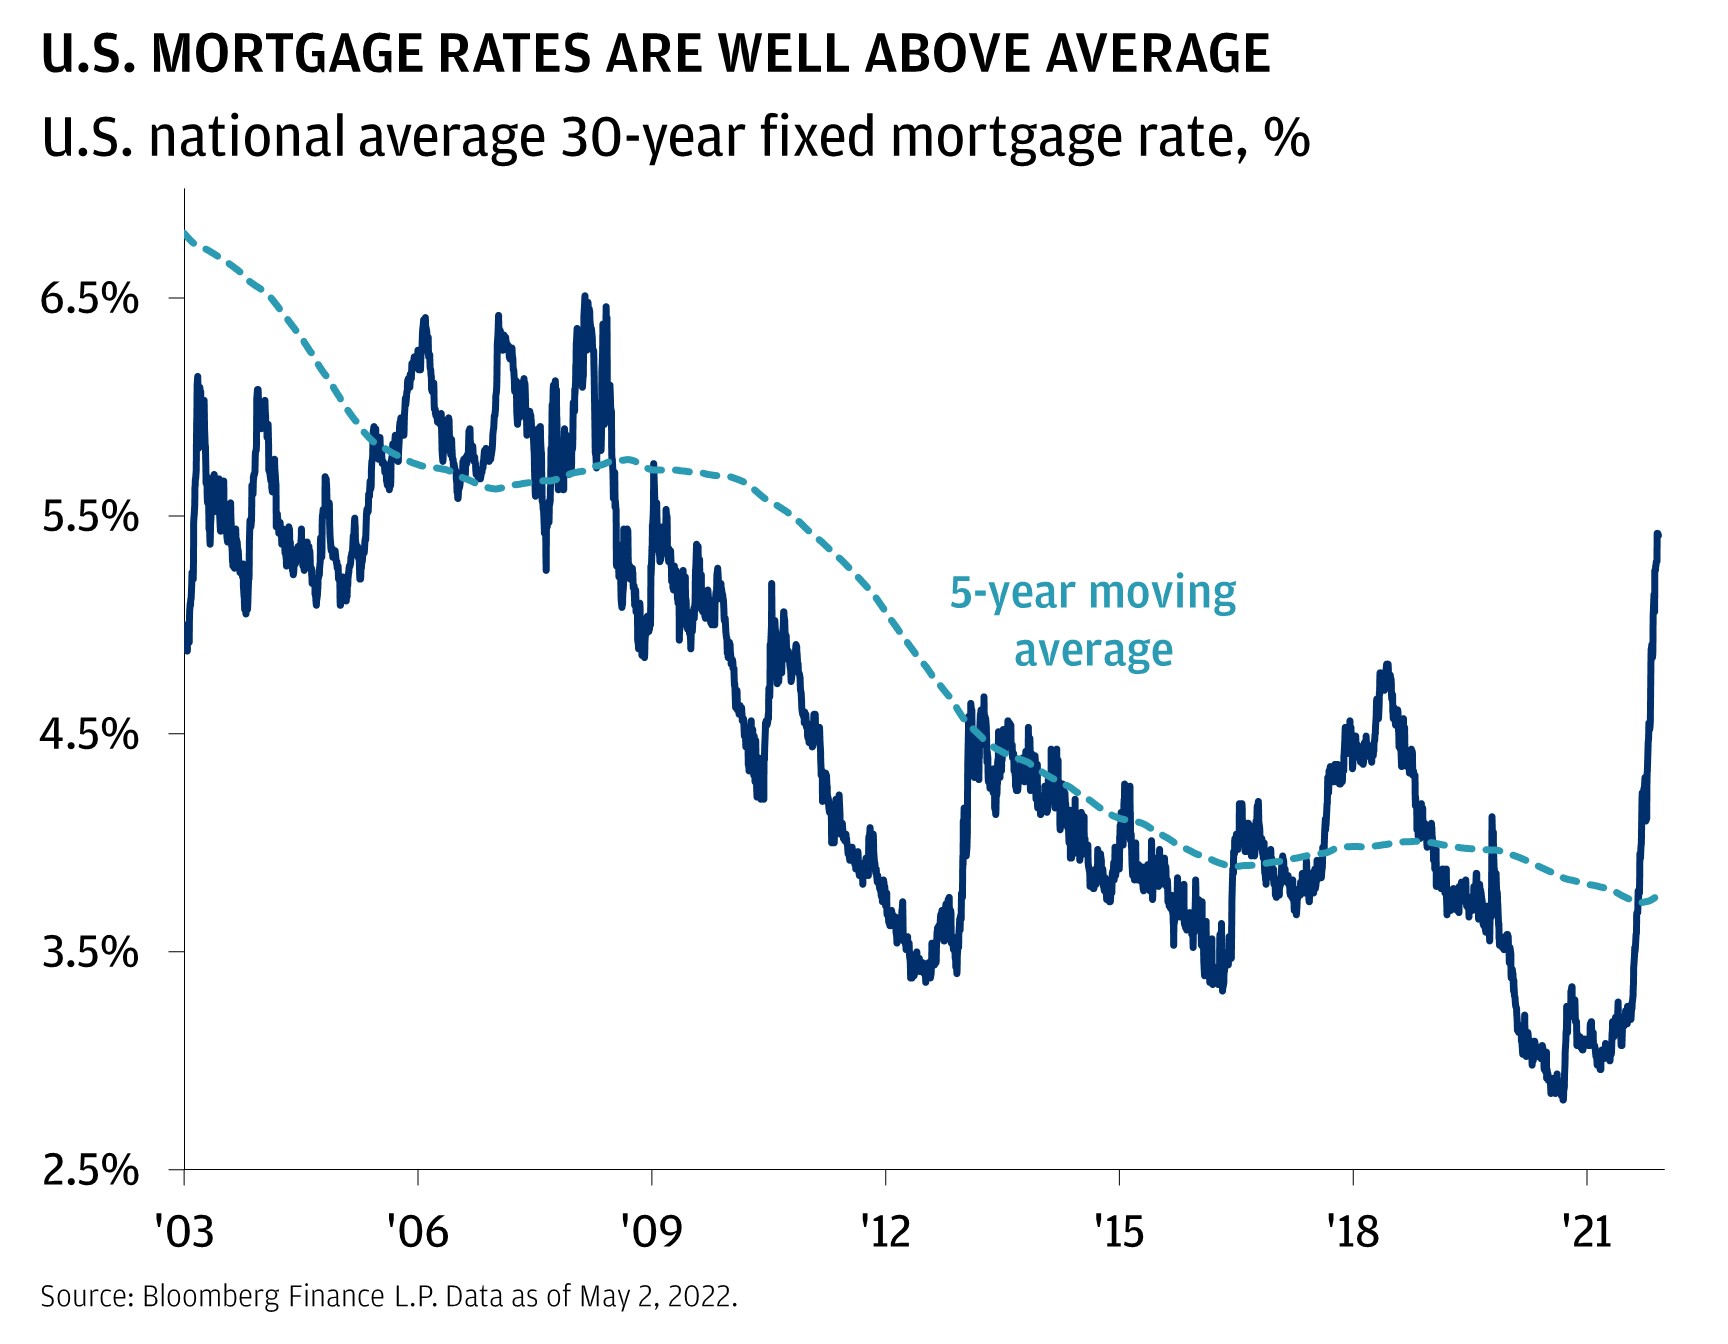 This chart shows the U.S. national average 30-year fixed mortgage rate from 2003 to 2022.